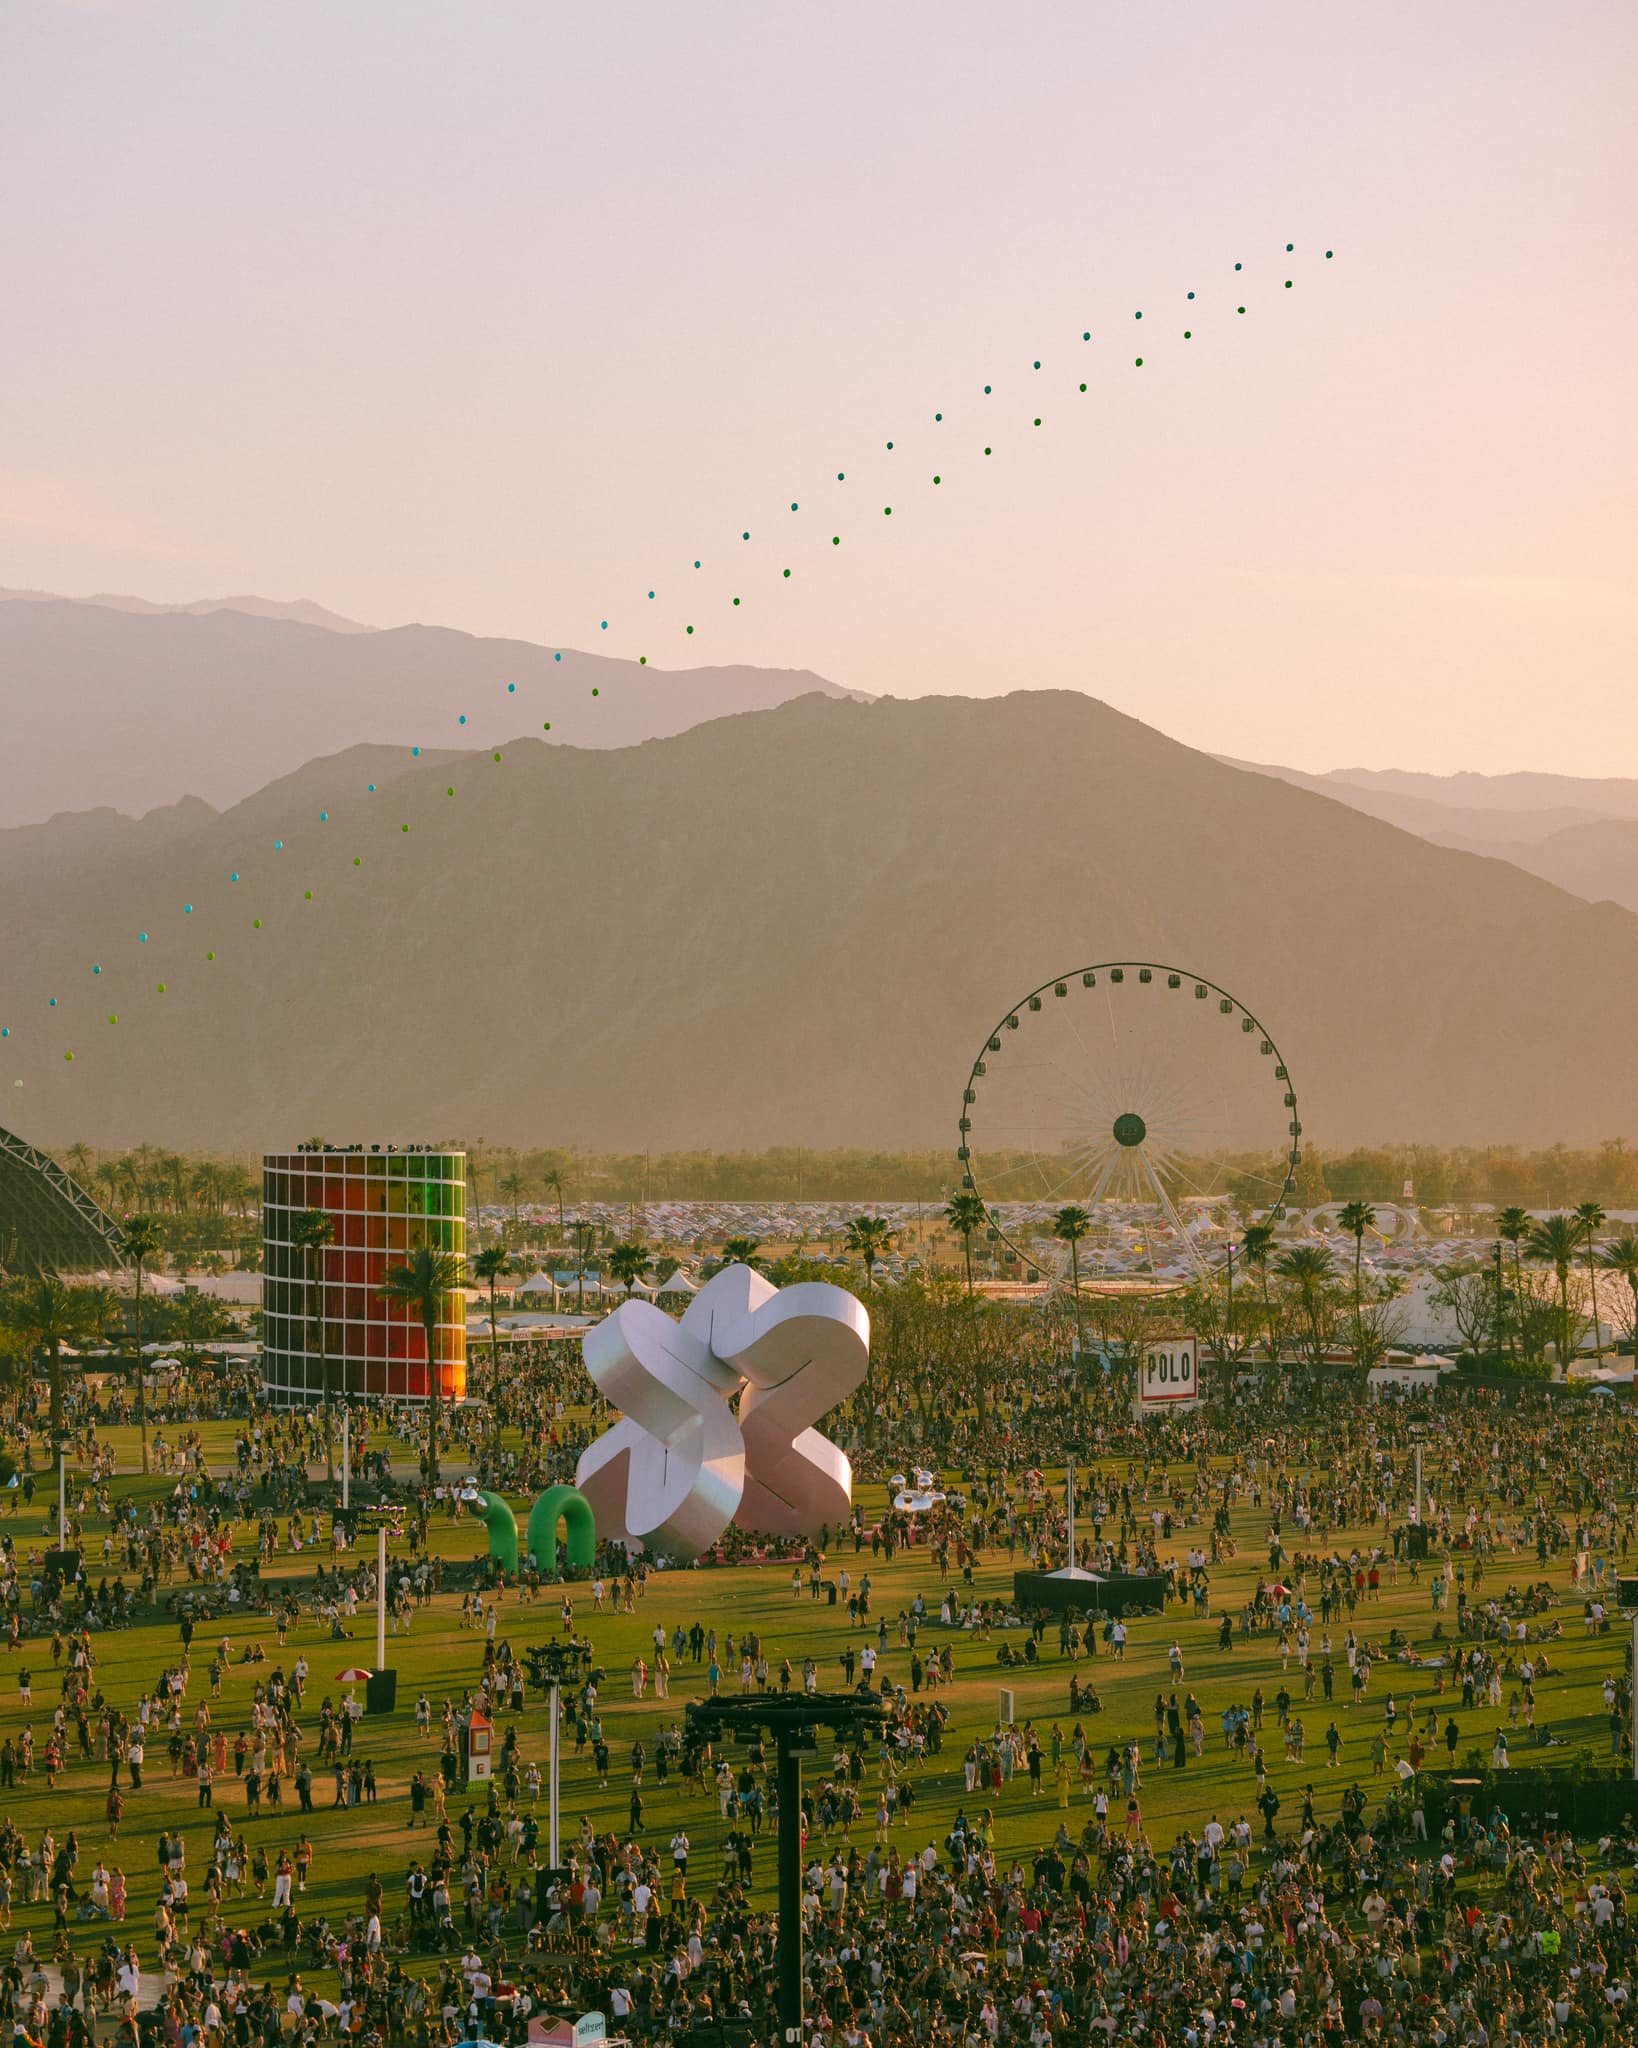 The best music festivals in the US | Coachella 2022, with art installations, a ferris wheel and crowds of people set in front of distant hills